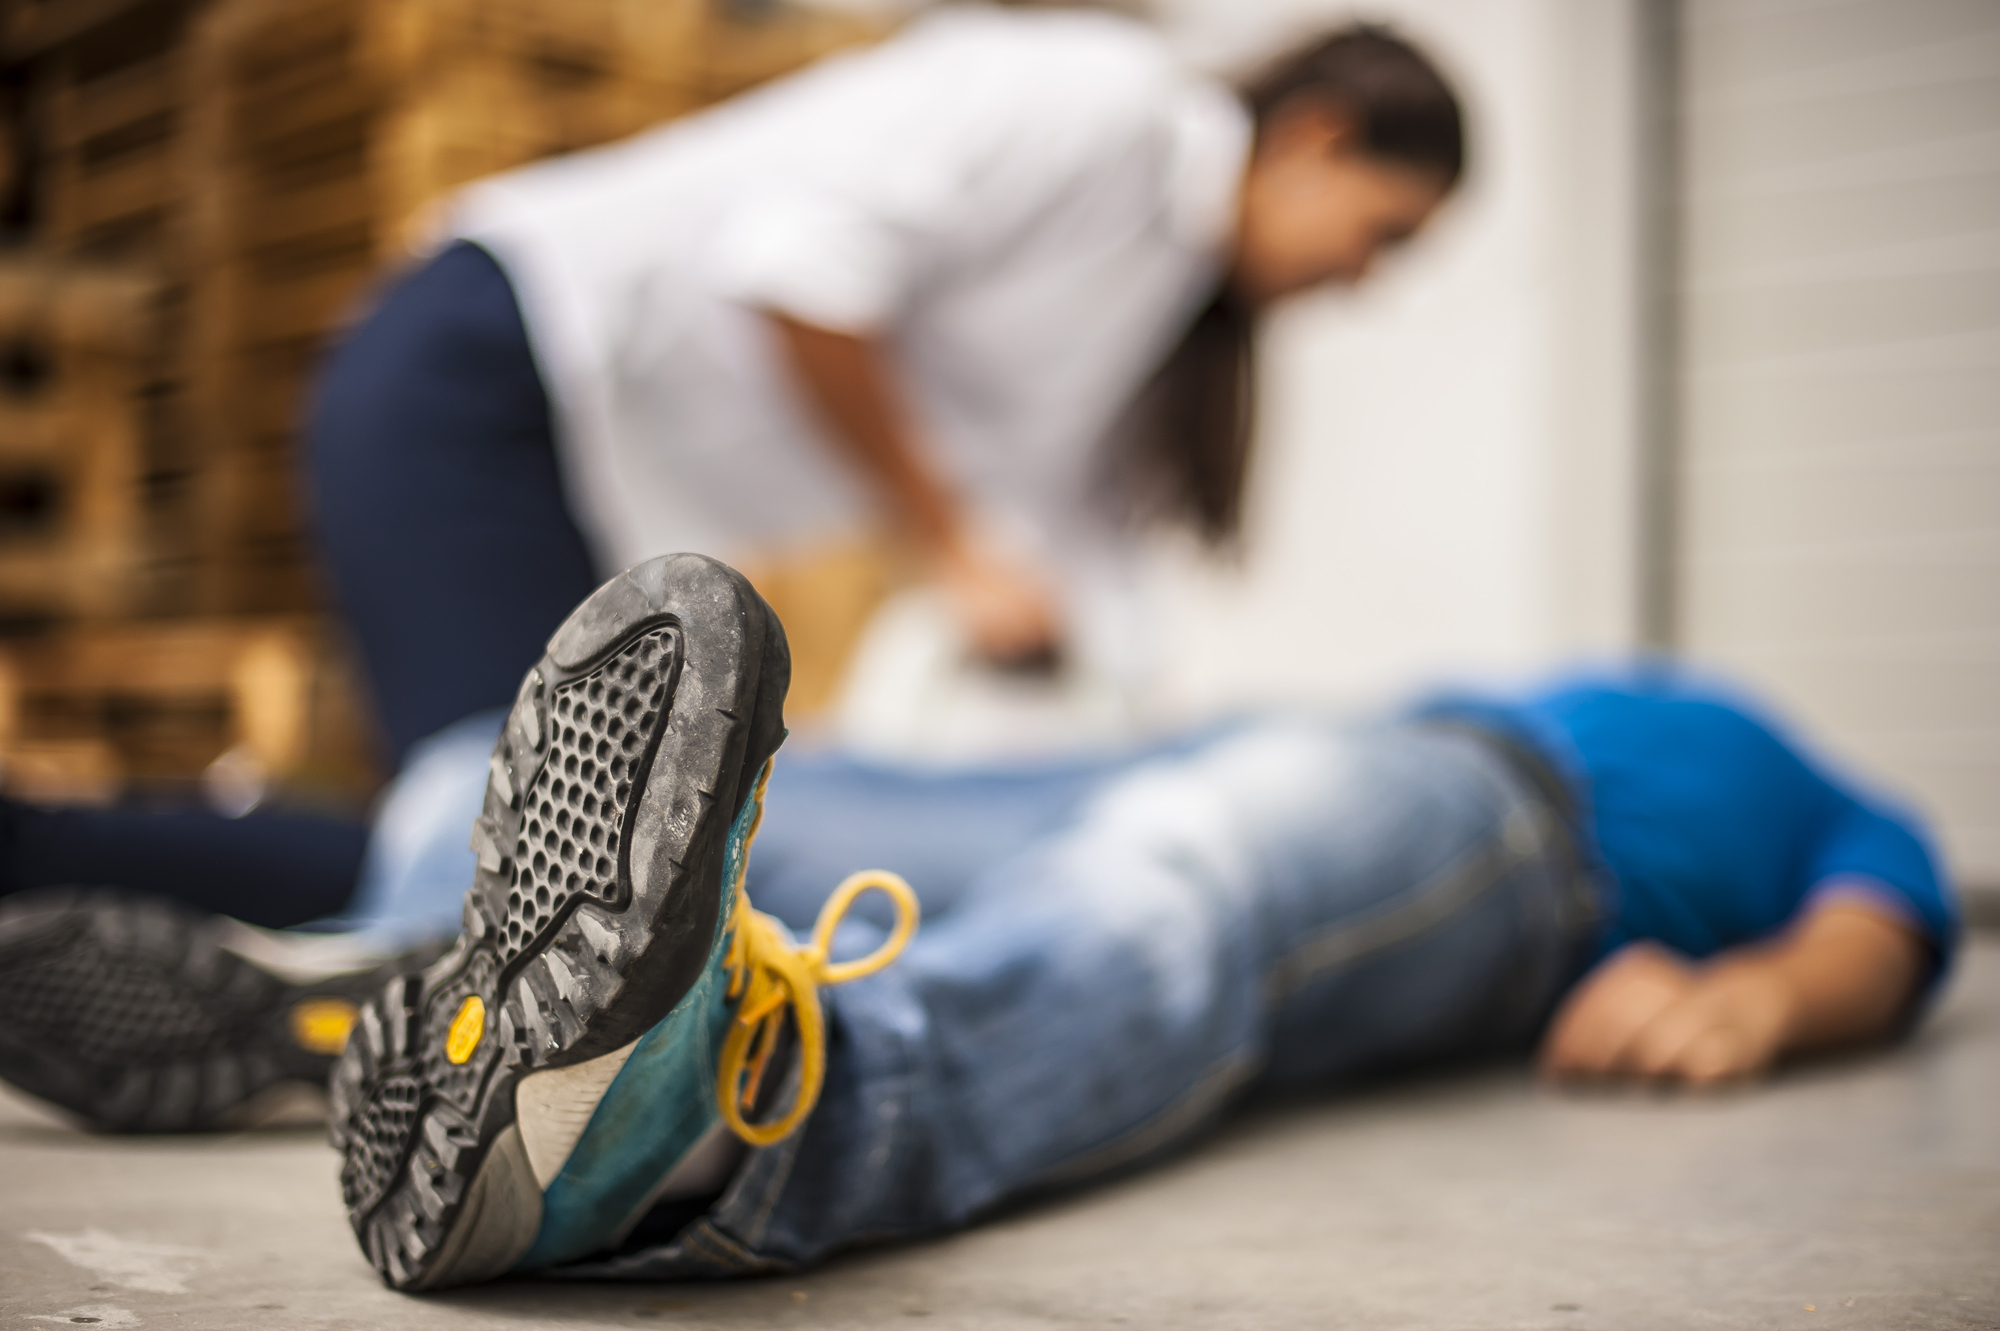 Common Places Where Slip & Fall Accidents Occur - man on floor with woman assisting